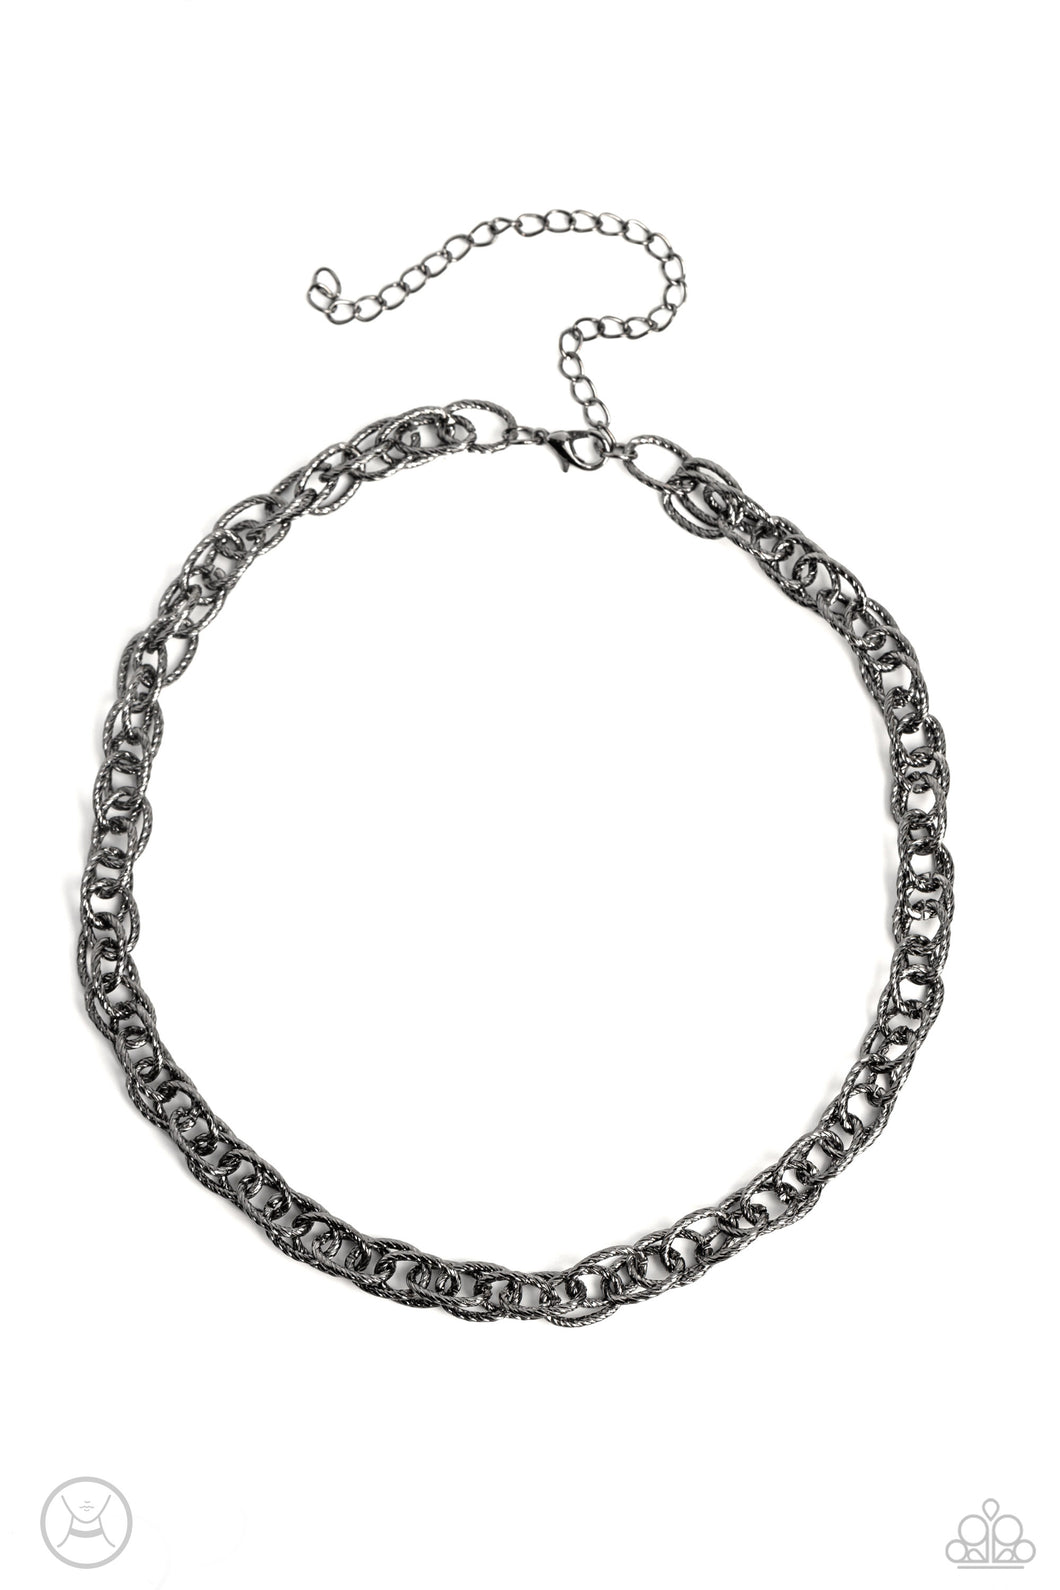 If I Only Had a CHAIN - Black (Gunmetal) Choker Necklace